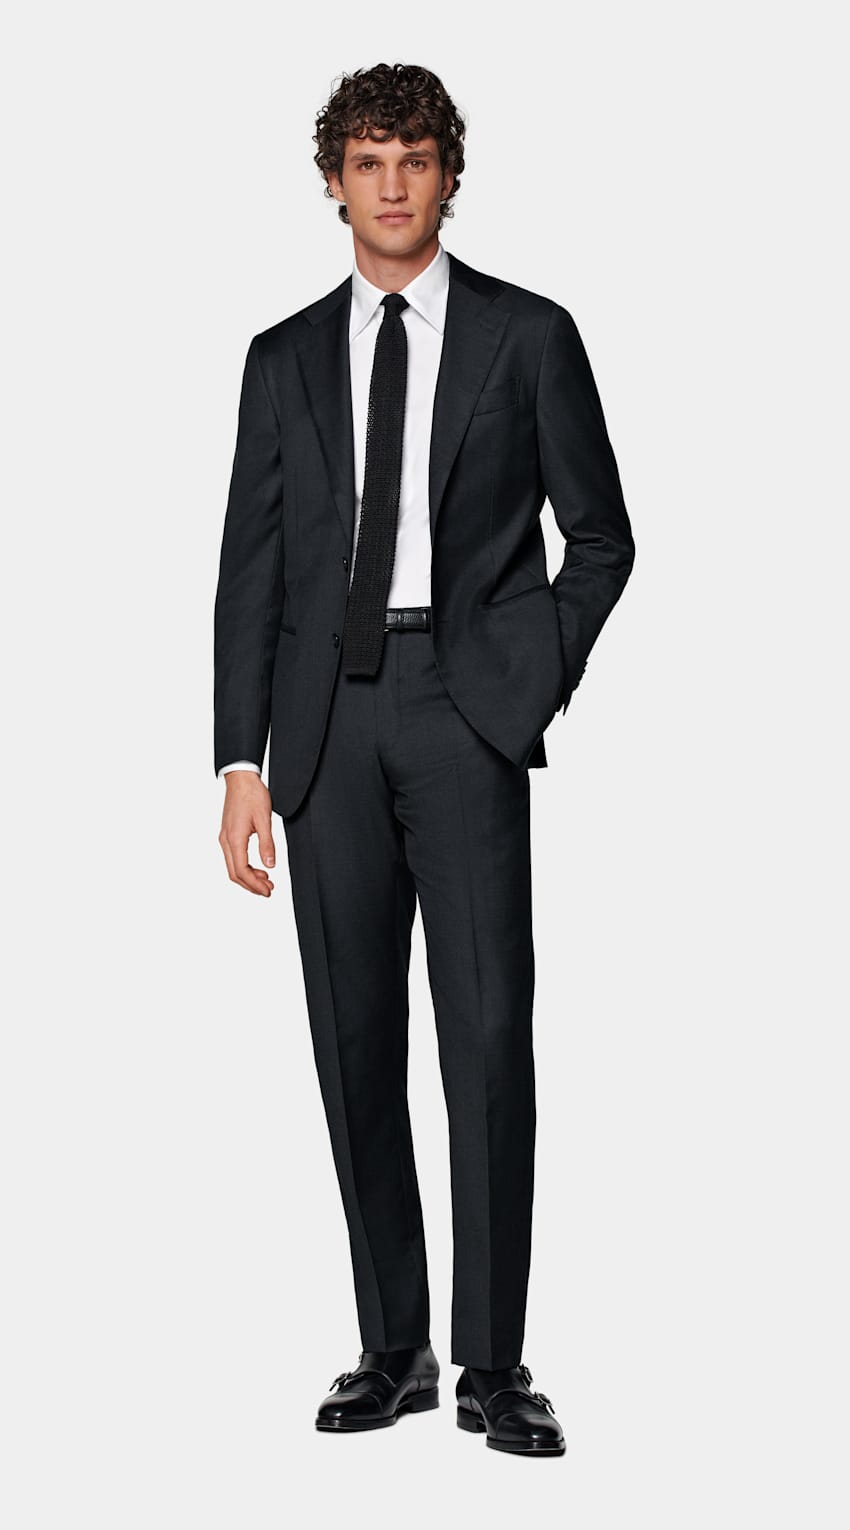 SUITSUPPLY All Season Pure Wool by Reda, Italy Dark Grey Perennial Tailored Fit Havana Suit